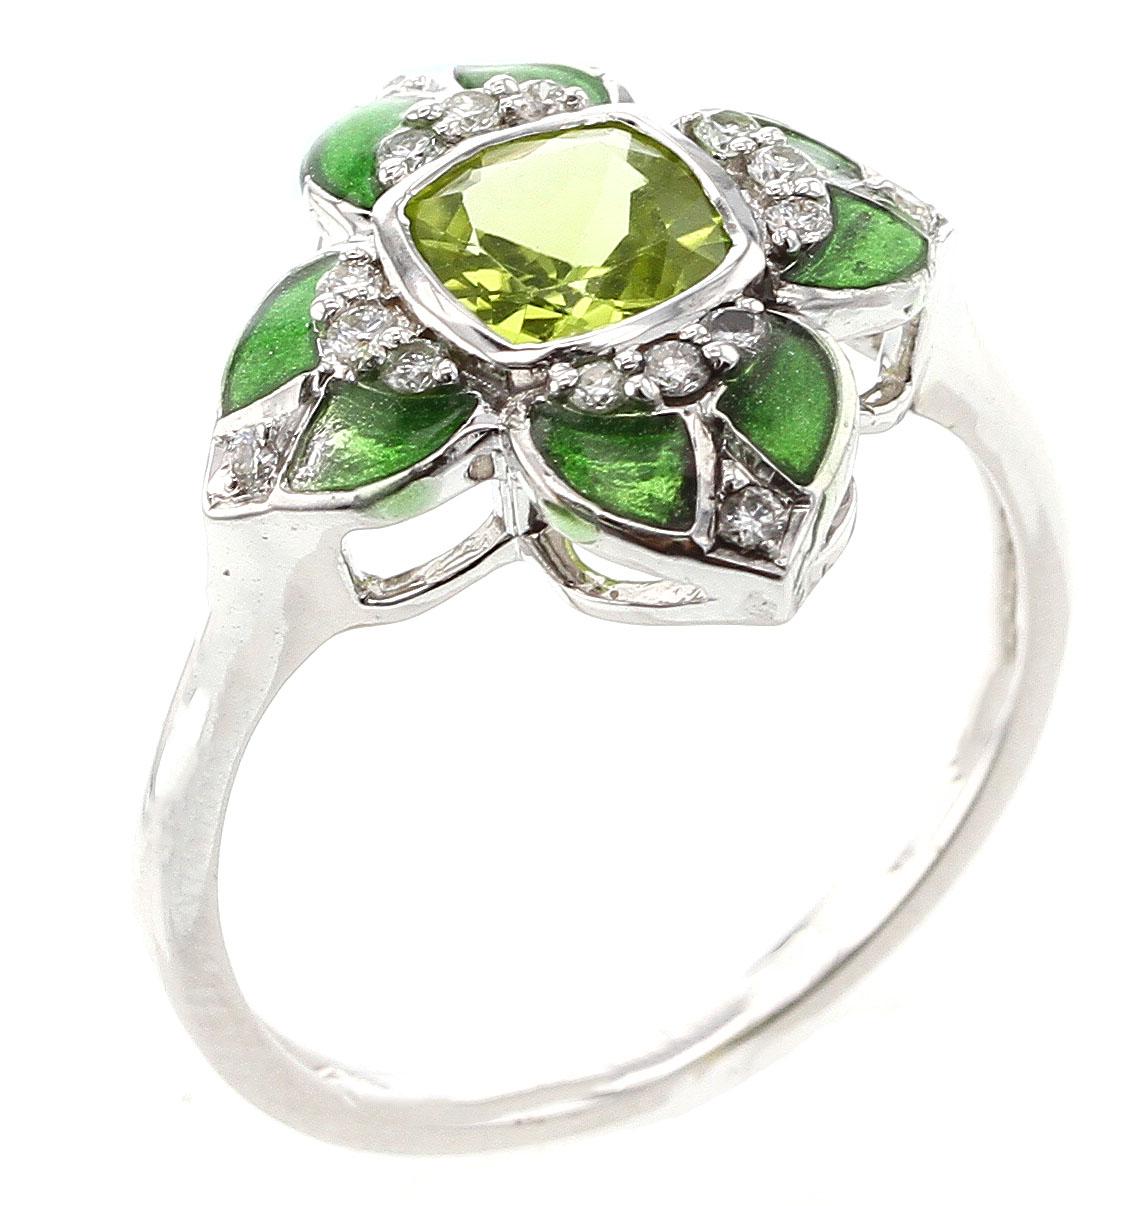 A clover-shape floral style Green Enamel Ring with a 0.81 ct. Peridot and 0.16 cts. of Diamonds. 14K White Gold.